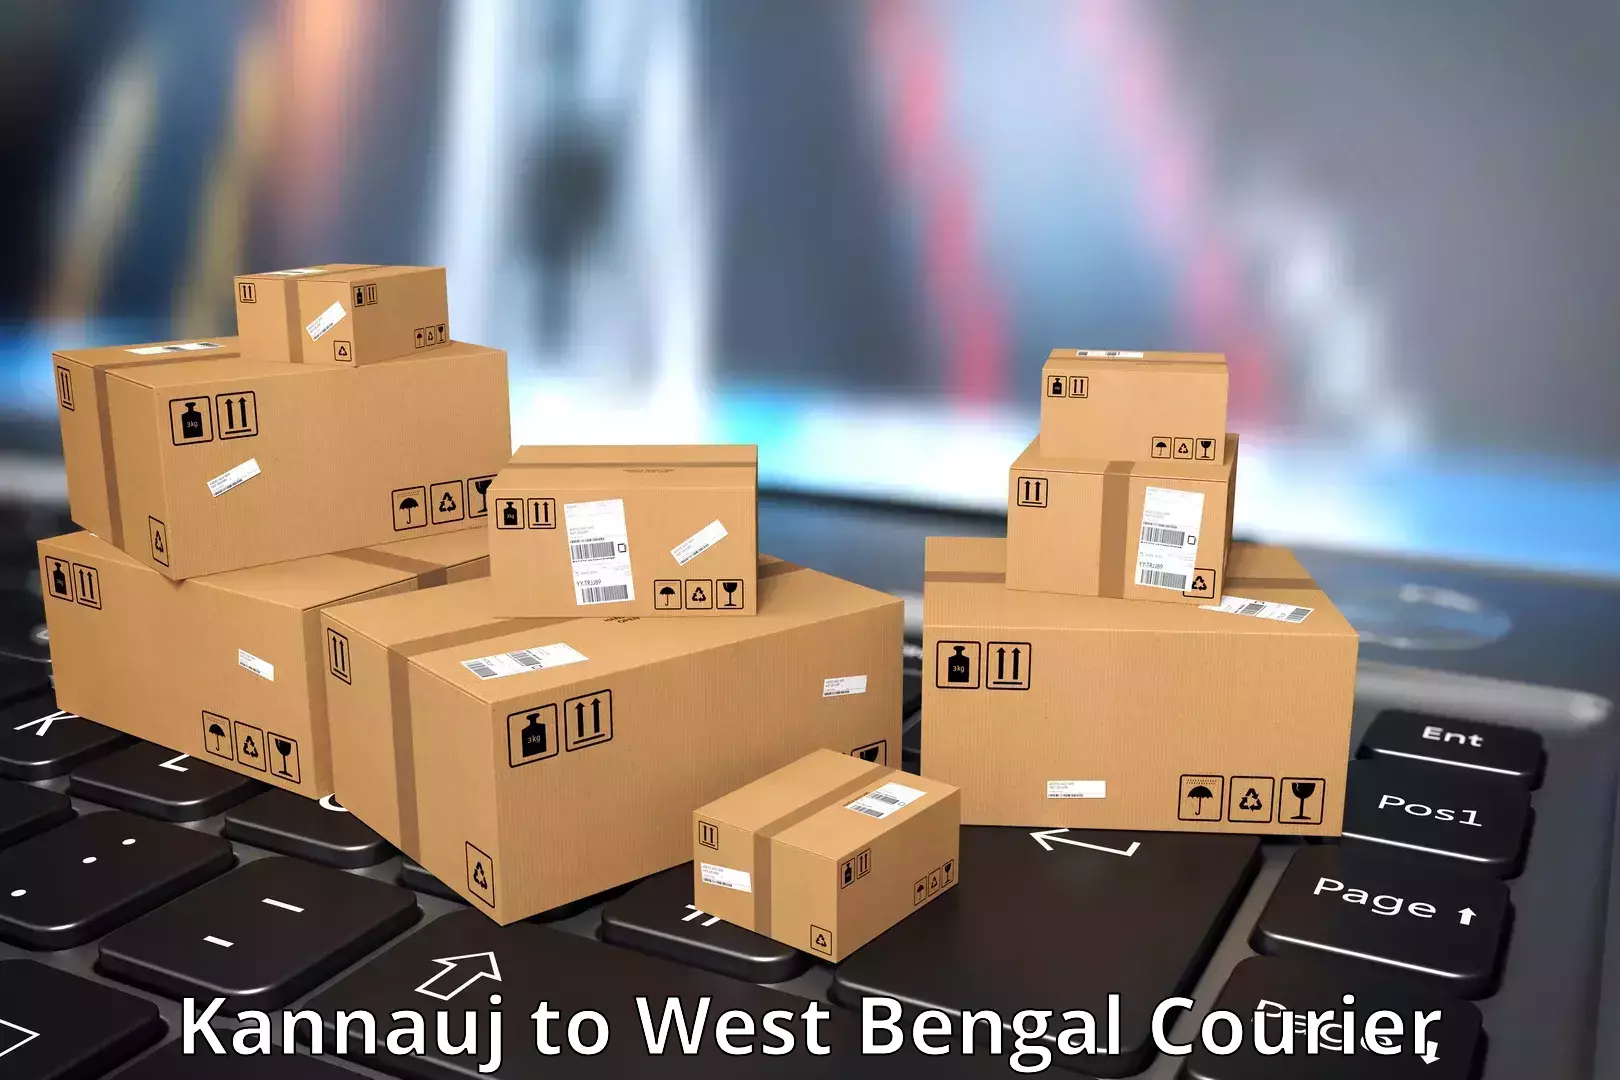 State-of-the-art courier technology Kannauj to Udaynarayanpur